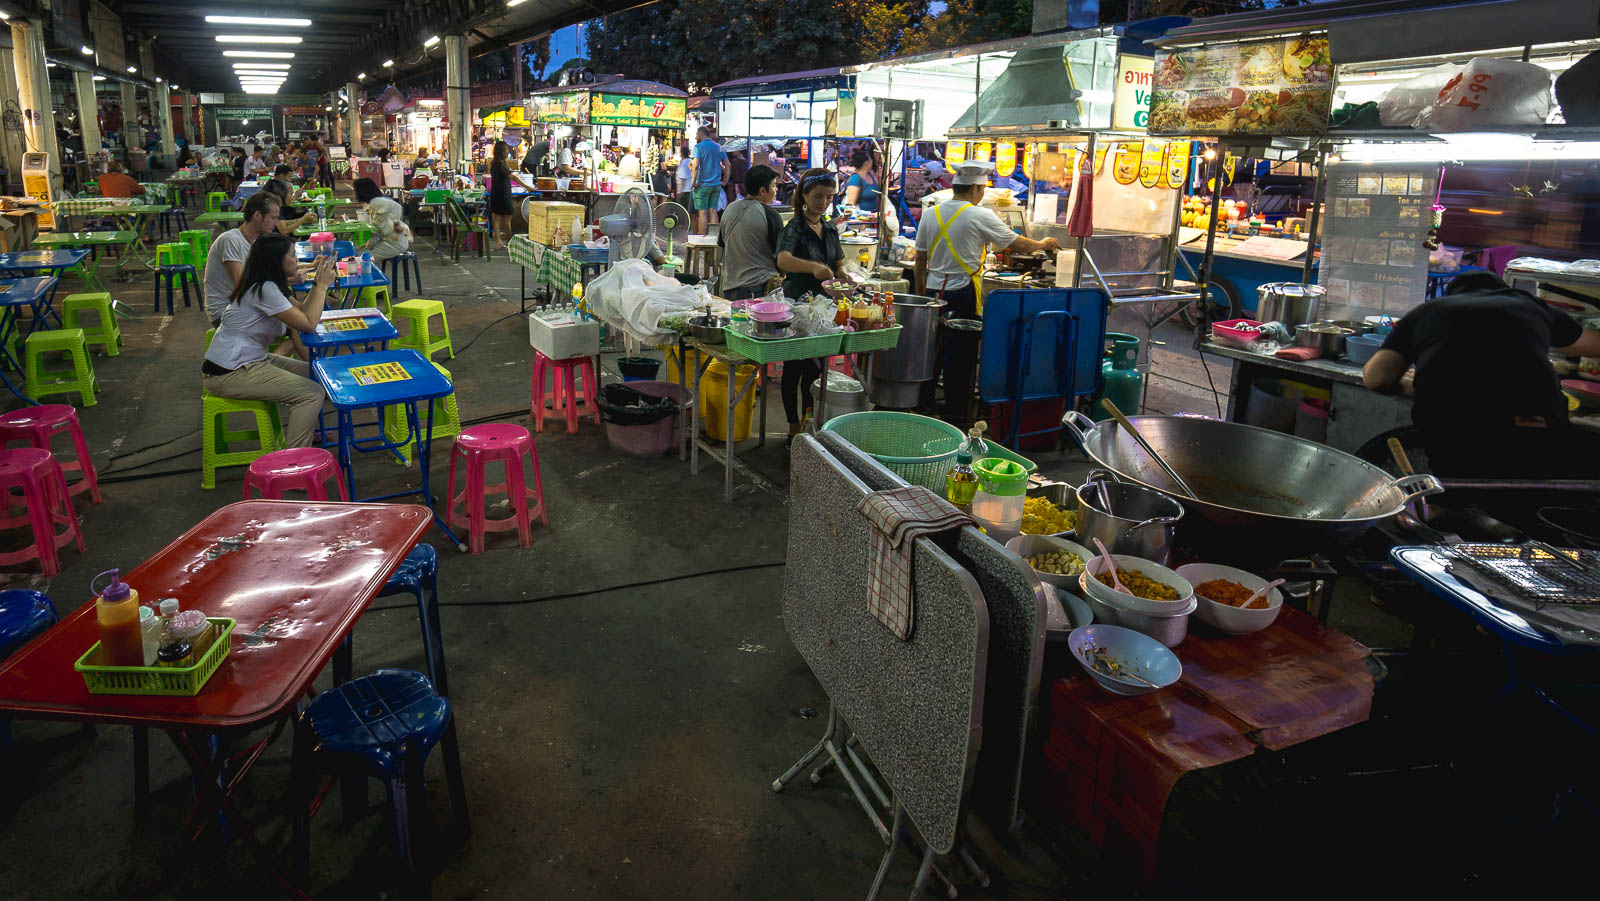 Seating area behind street food vendors in Thailand - Find Away Photography